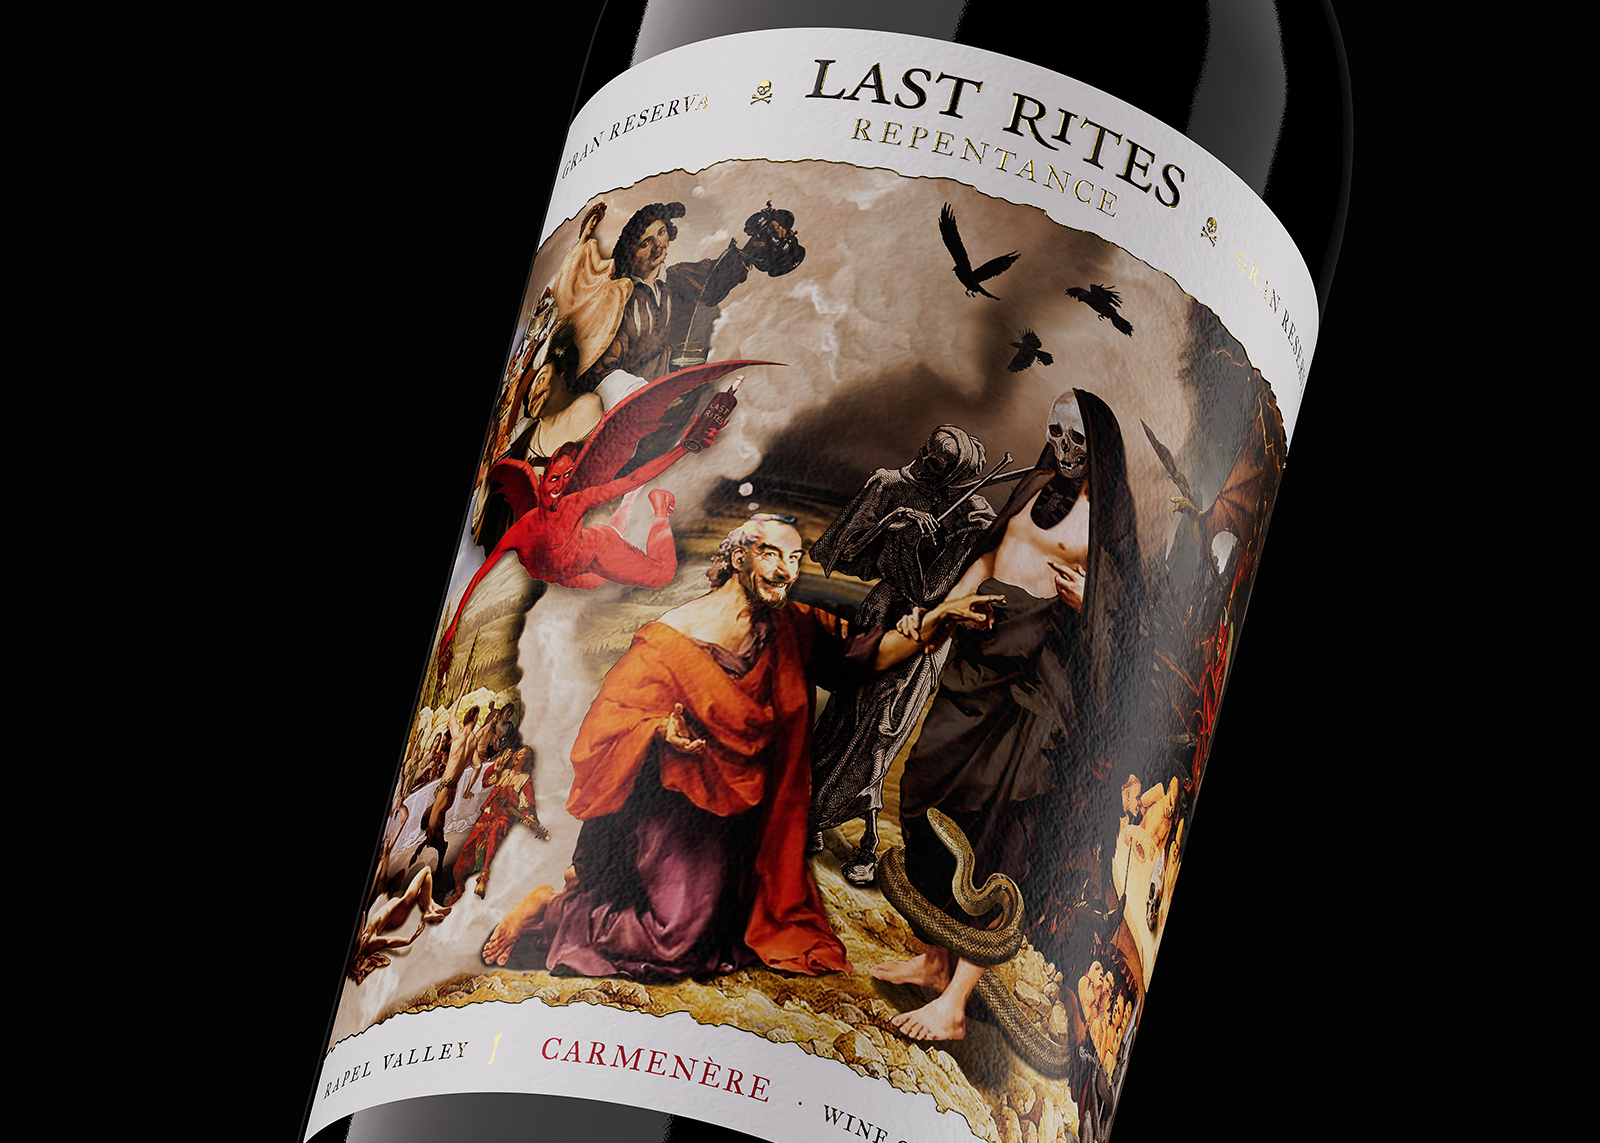 Last Rites Conceptualization for the Storytelling and Label Design